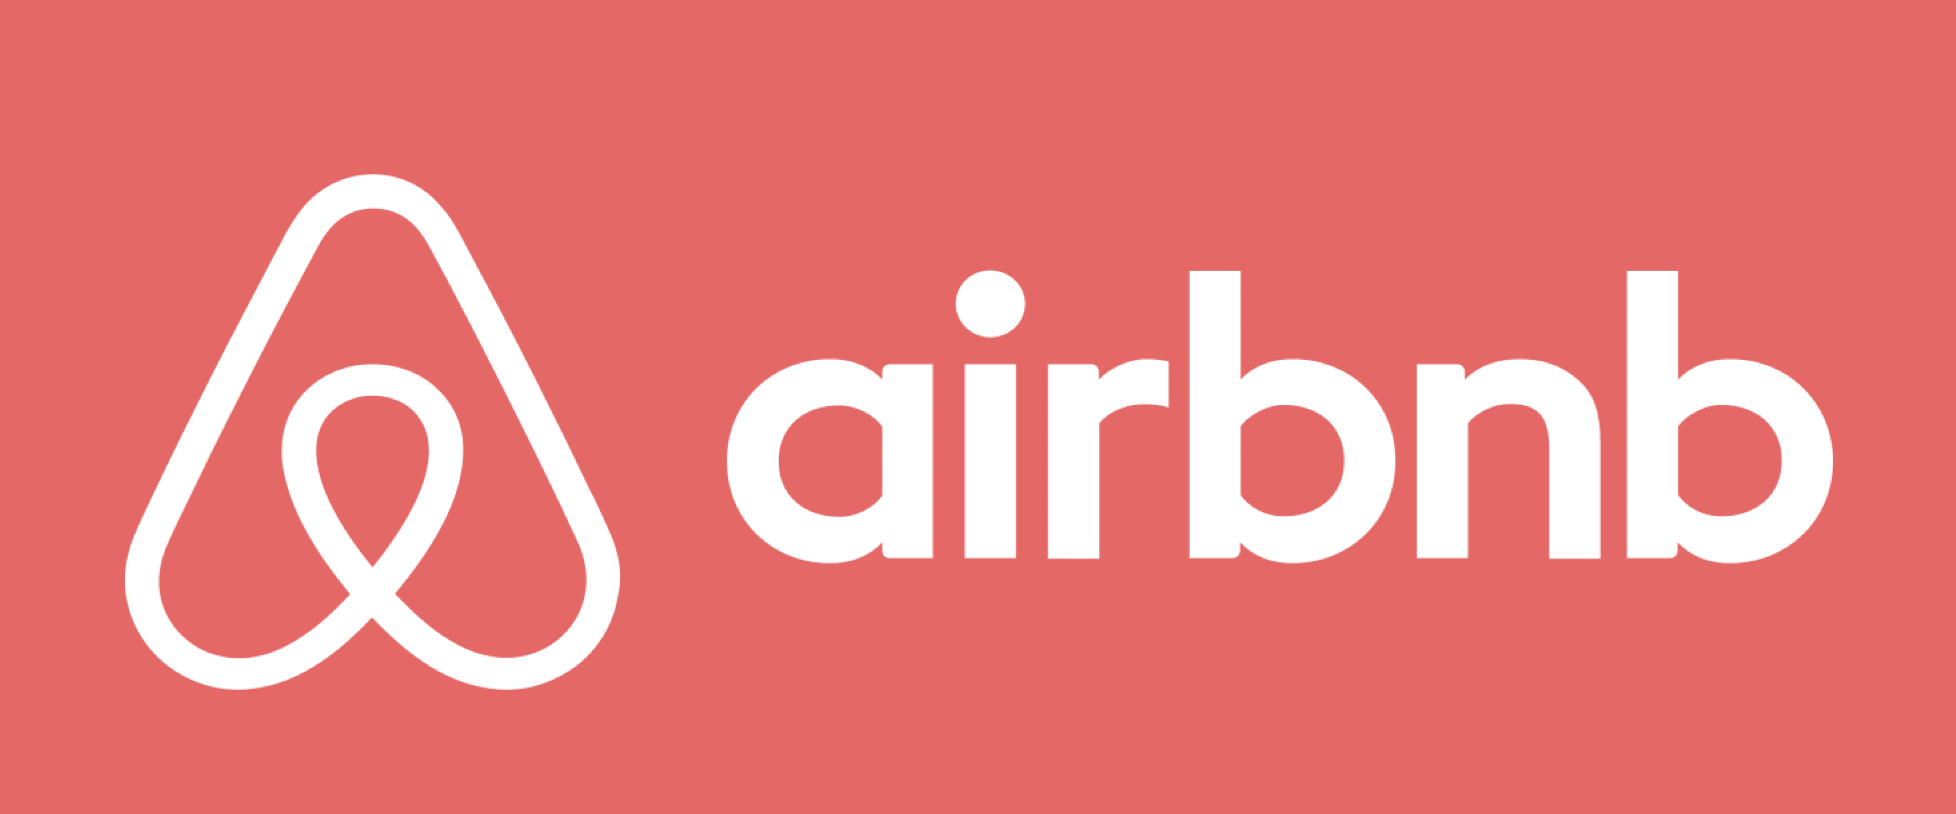 Airbnb logo. Airbnb has managed to win over the hospitality industry with its strategy and innovation